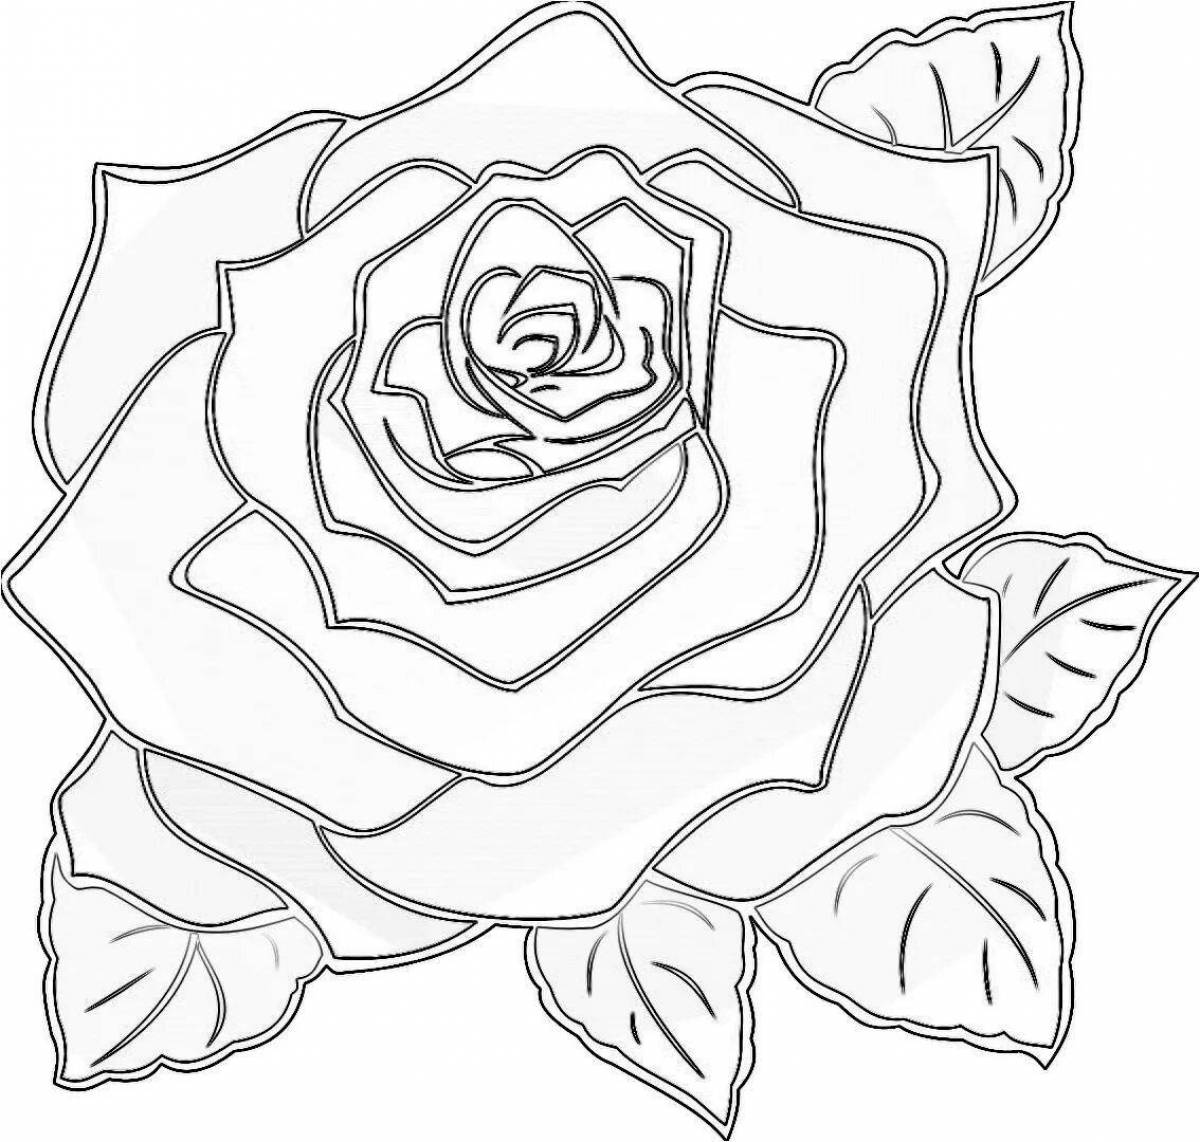 Bright coloring picture of a rose